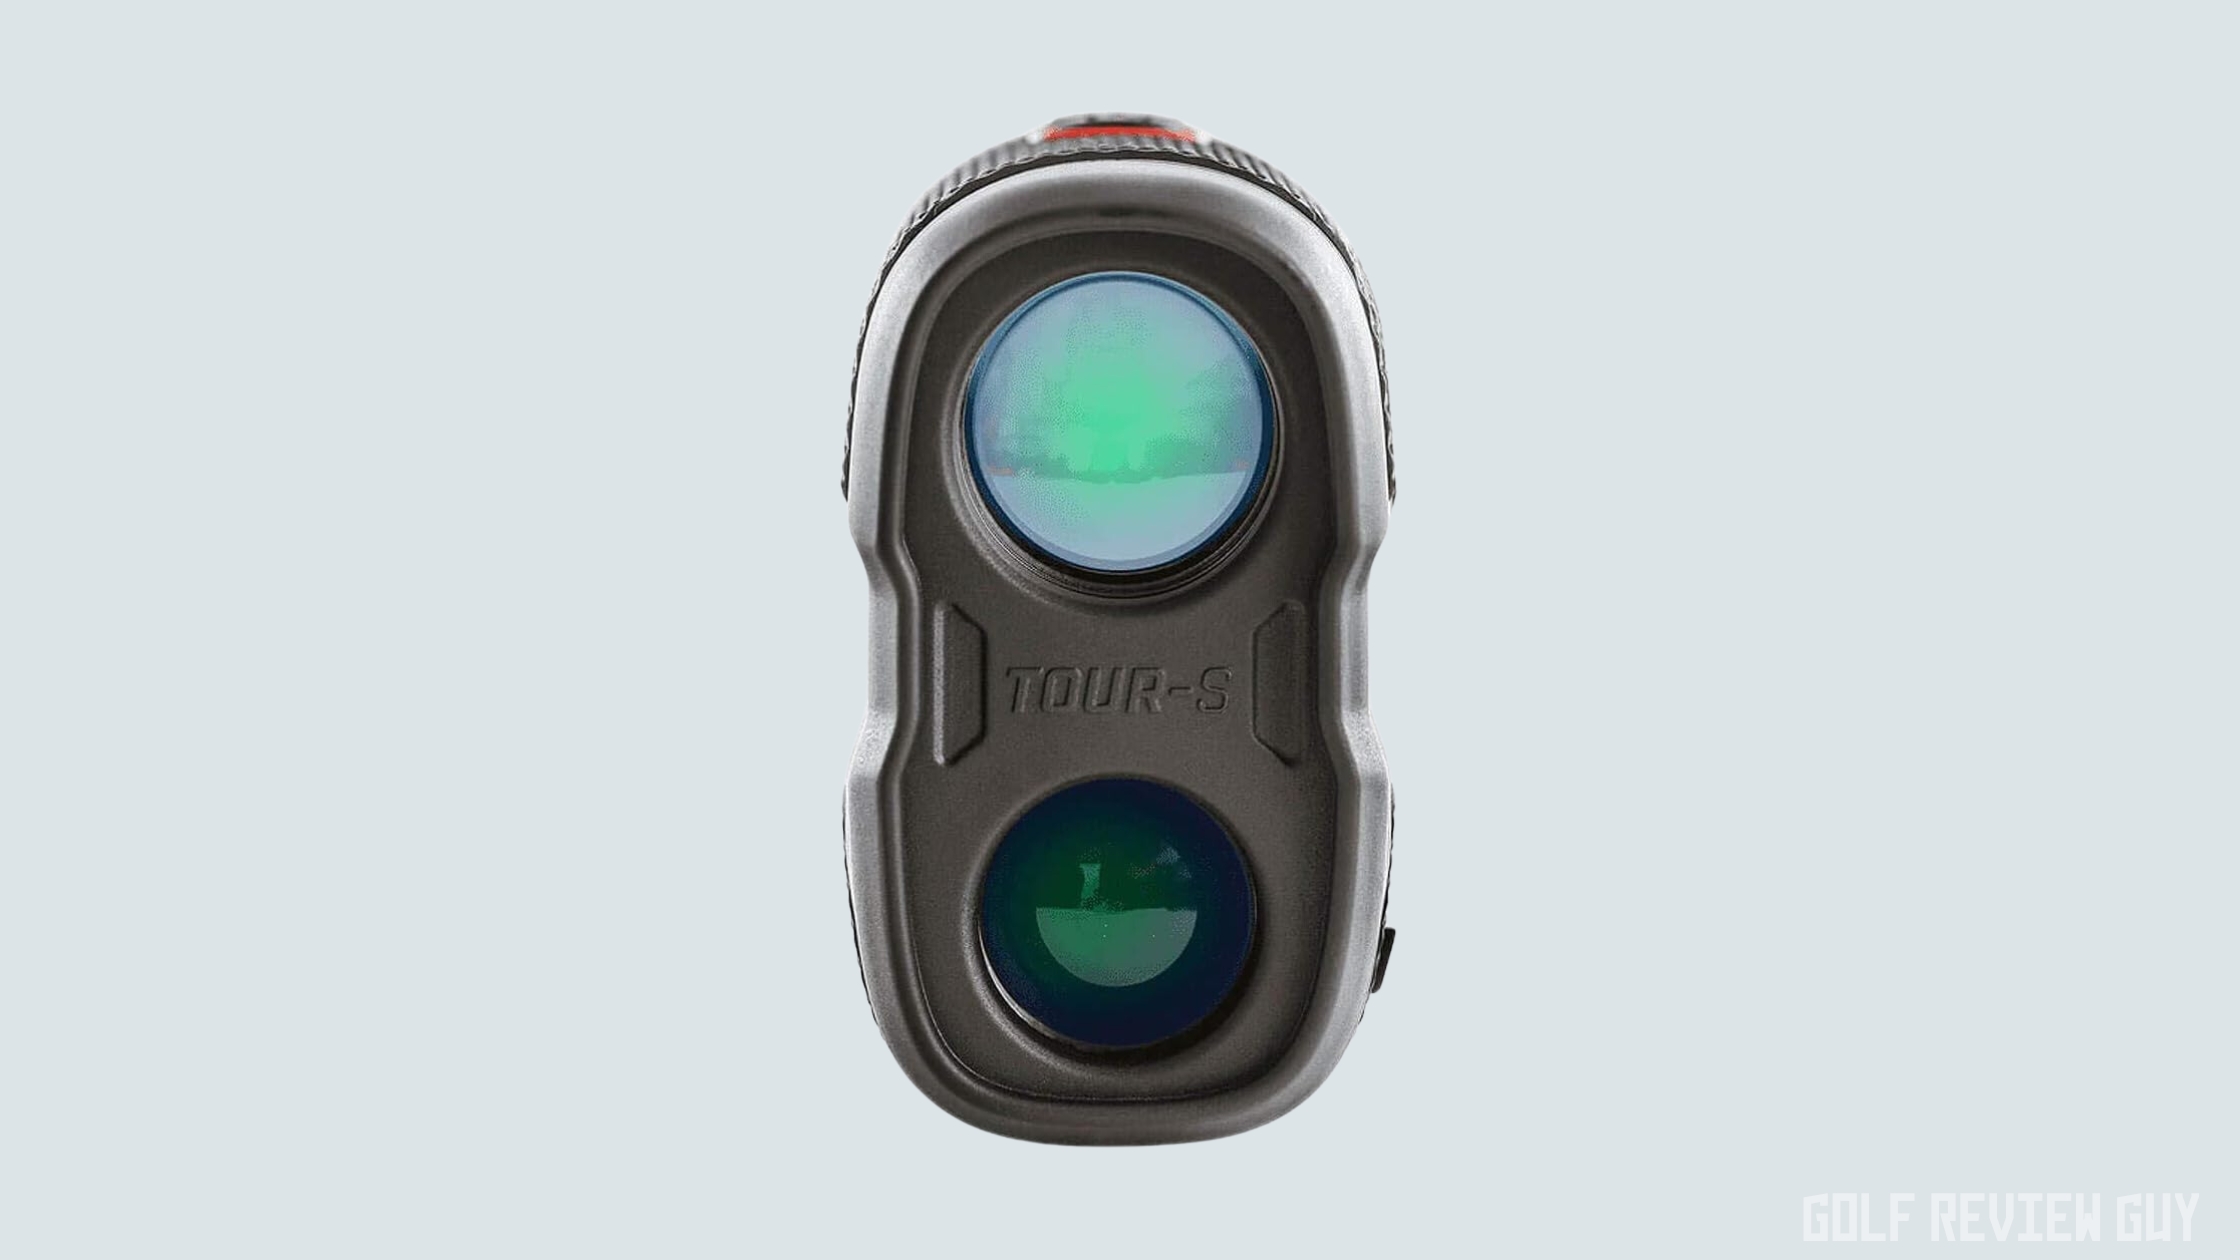 Callaway Tour S Laser Rangefinder Review - Golf Review Guy (2)